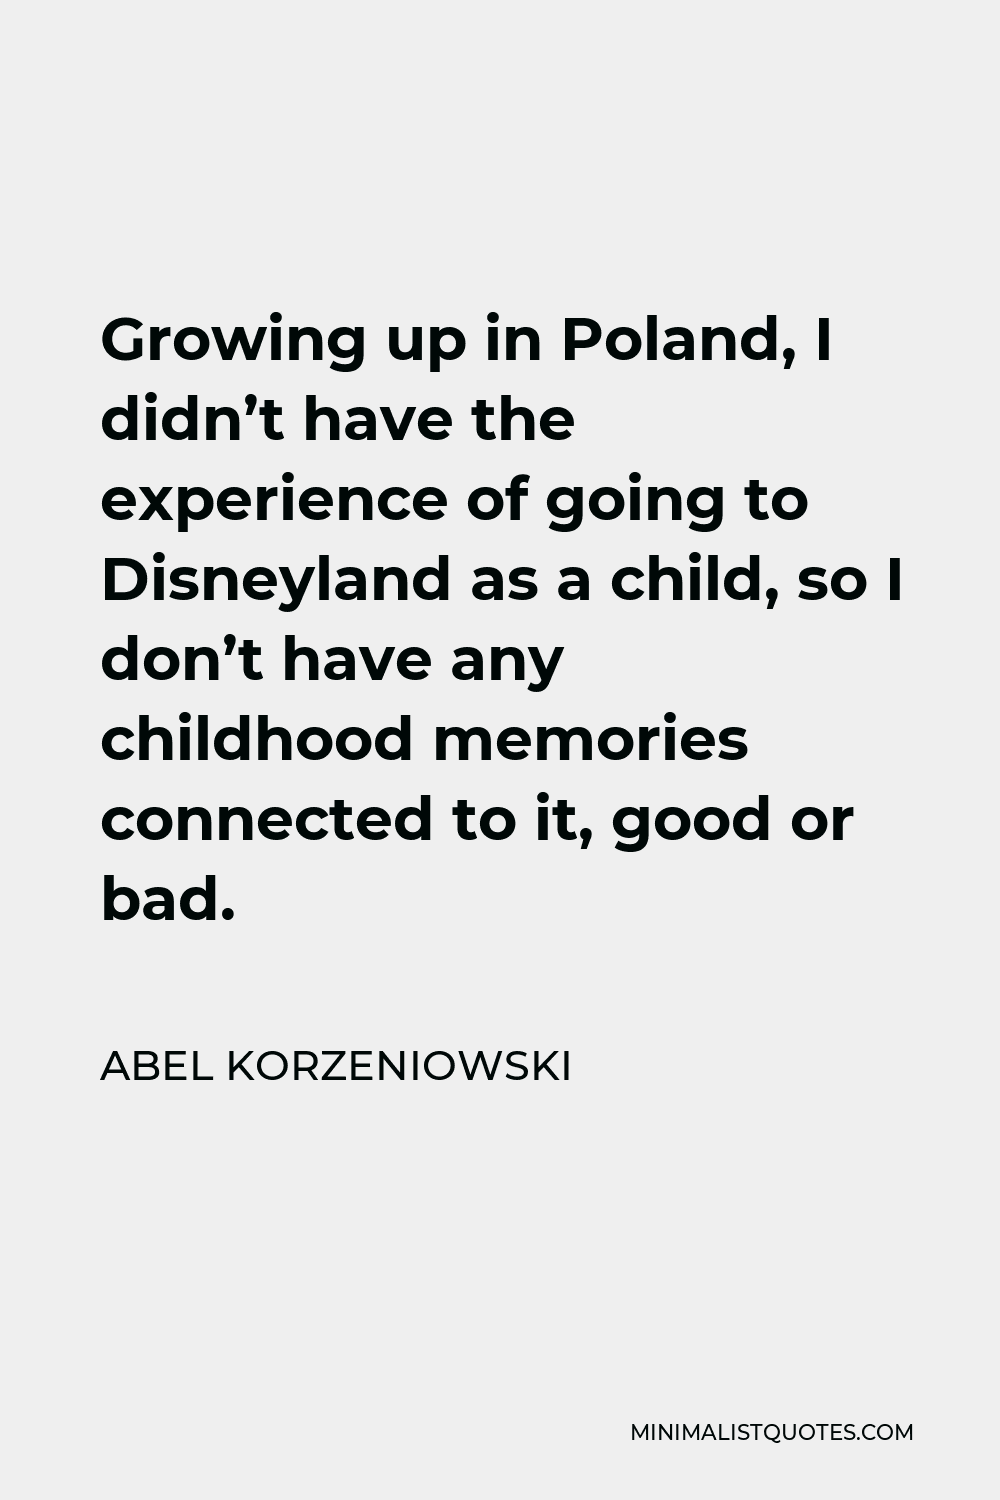 Abel Korzeniowski Quote - Growing up in Poland, I didn’t have the experience of going to Disneyland as a child, so I don’t have any childhood memories connected to it, good or bad.